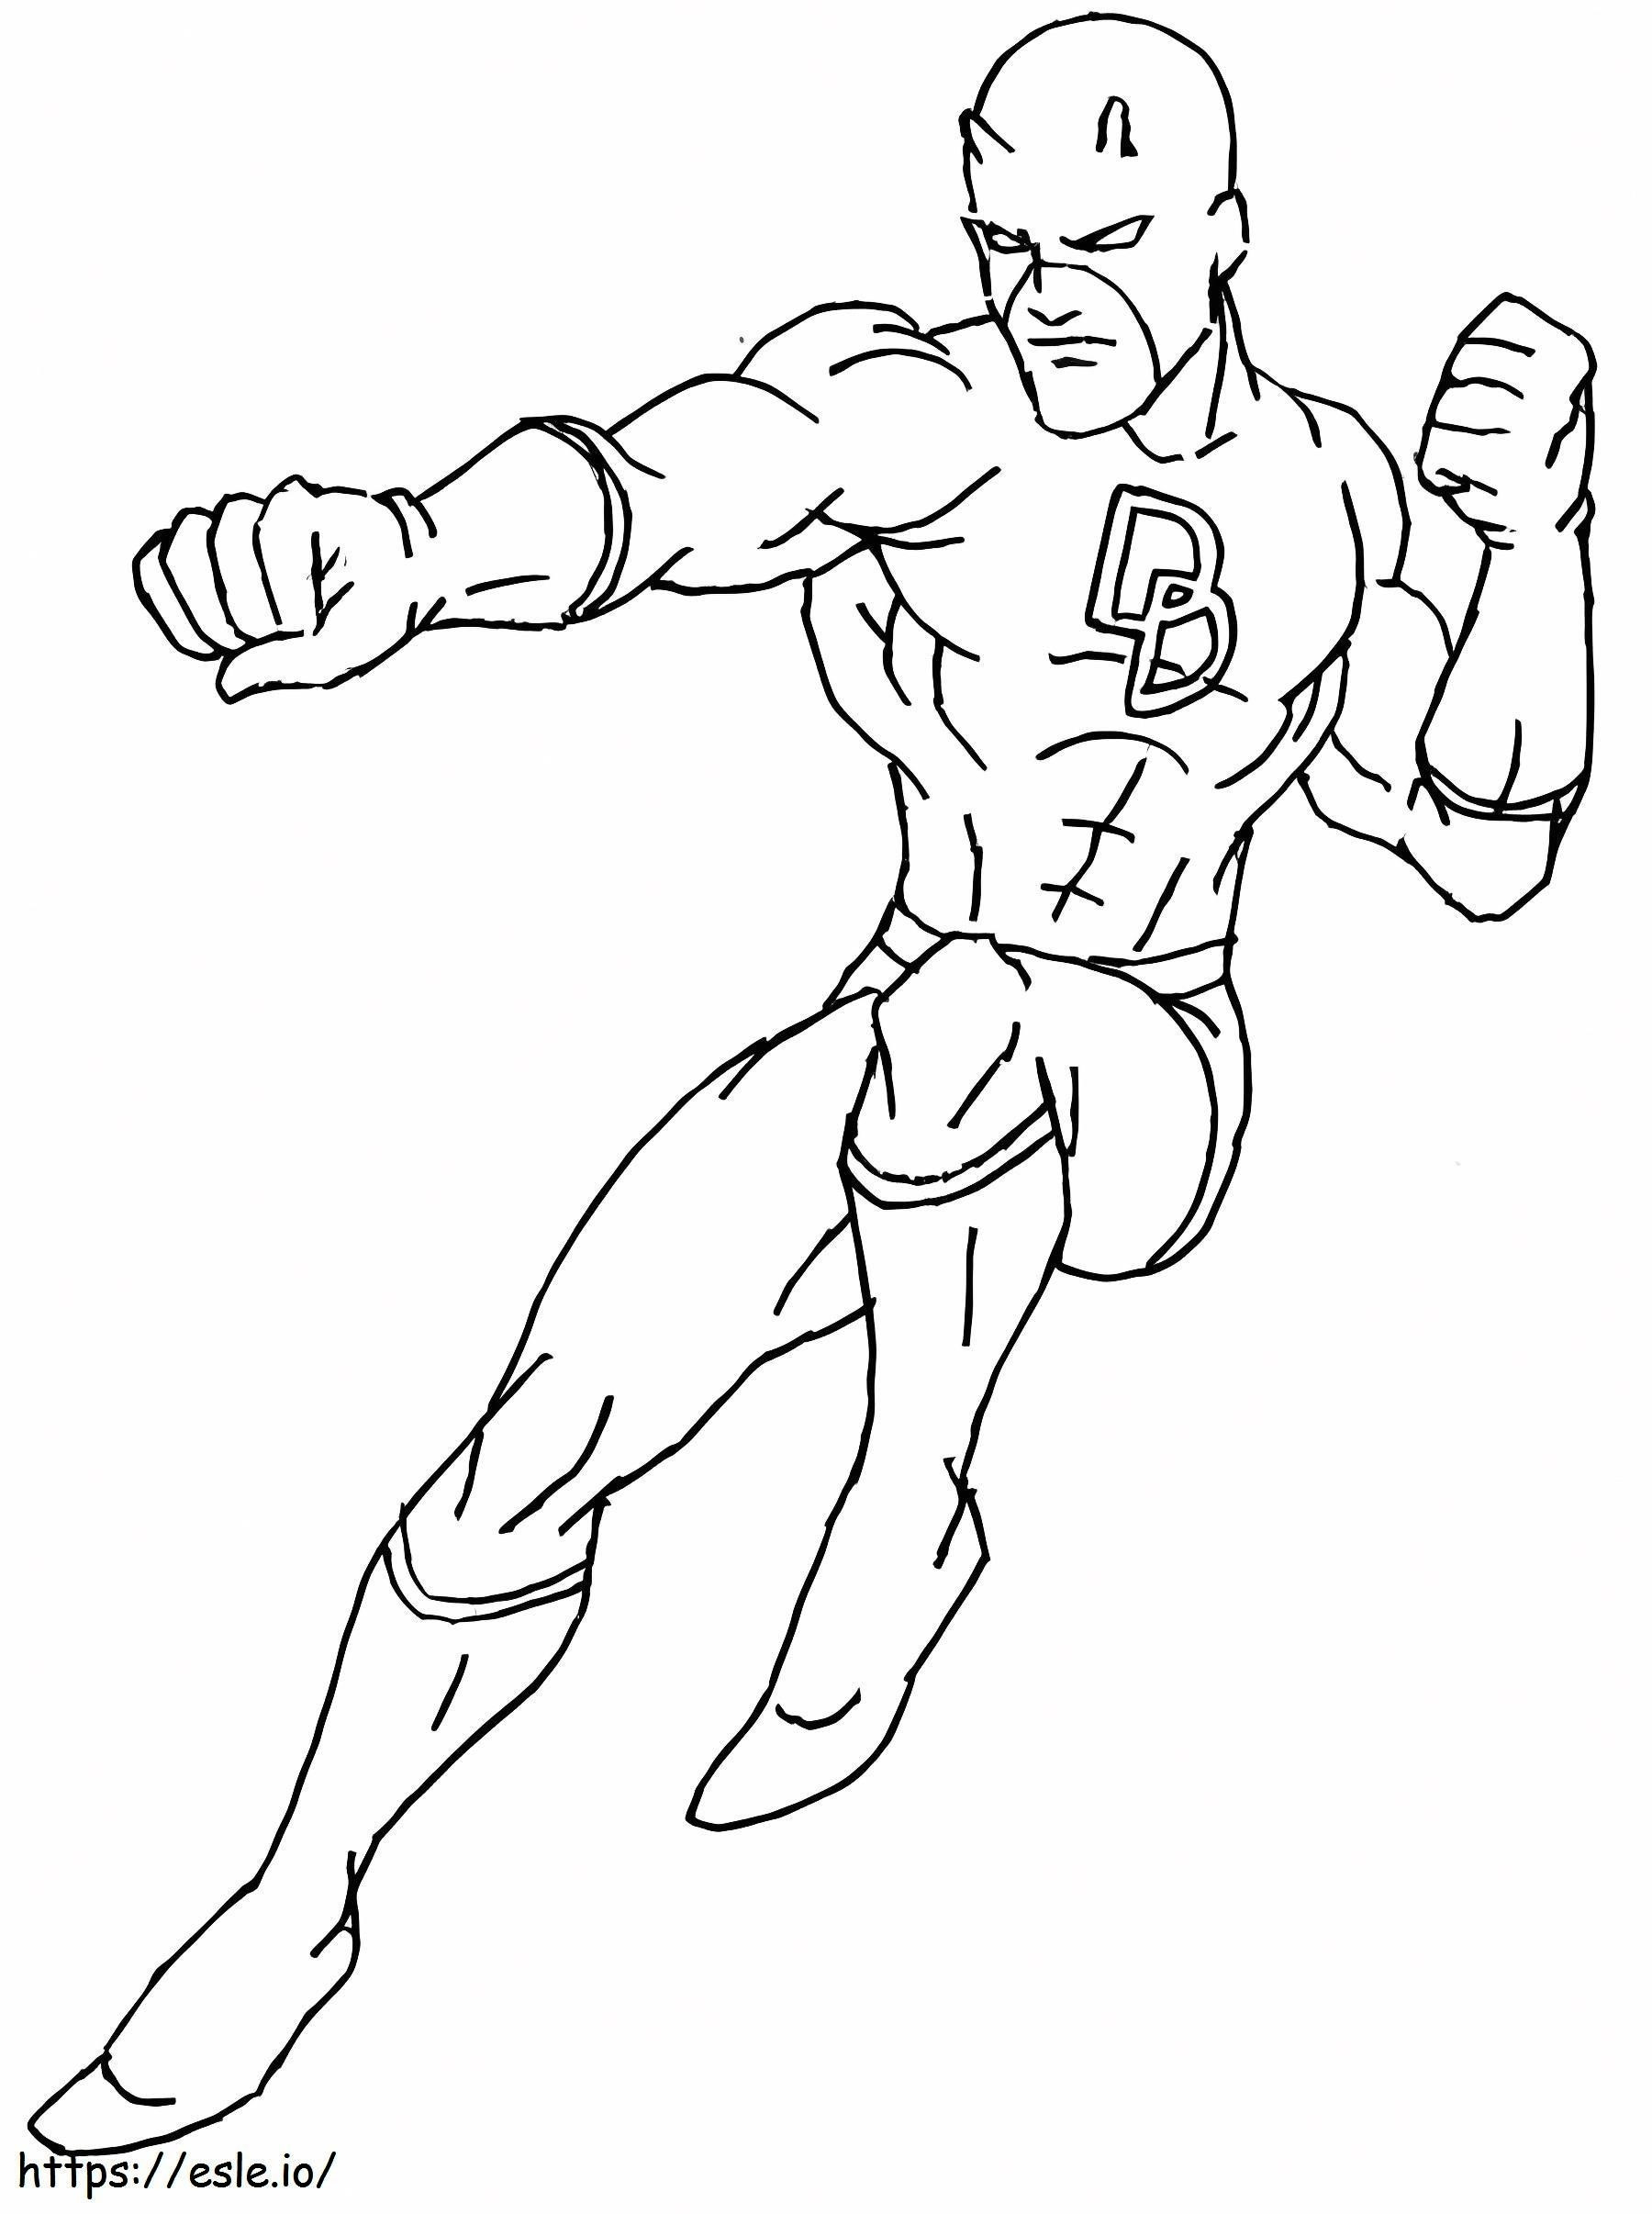 Daredevil To Print coloring page